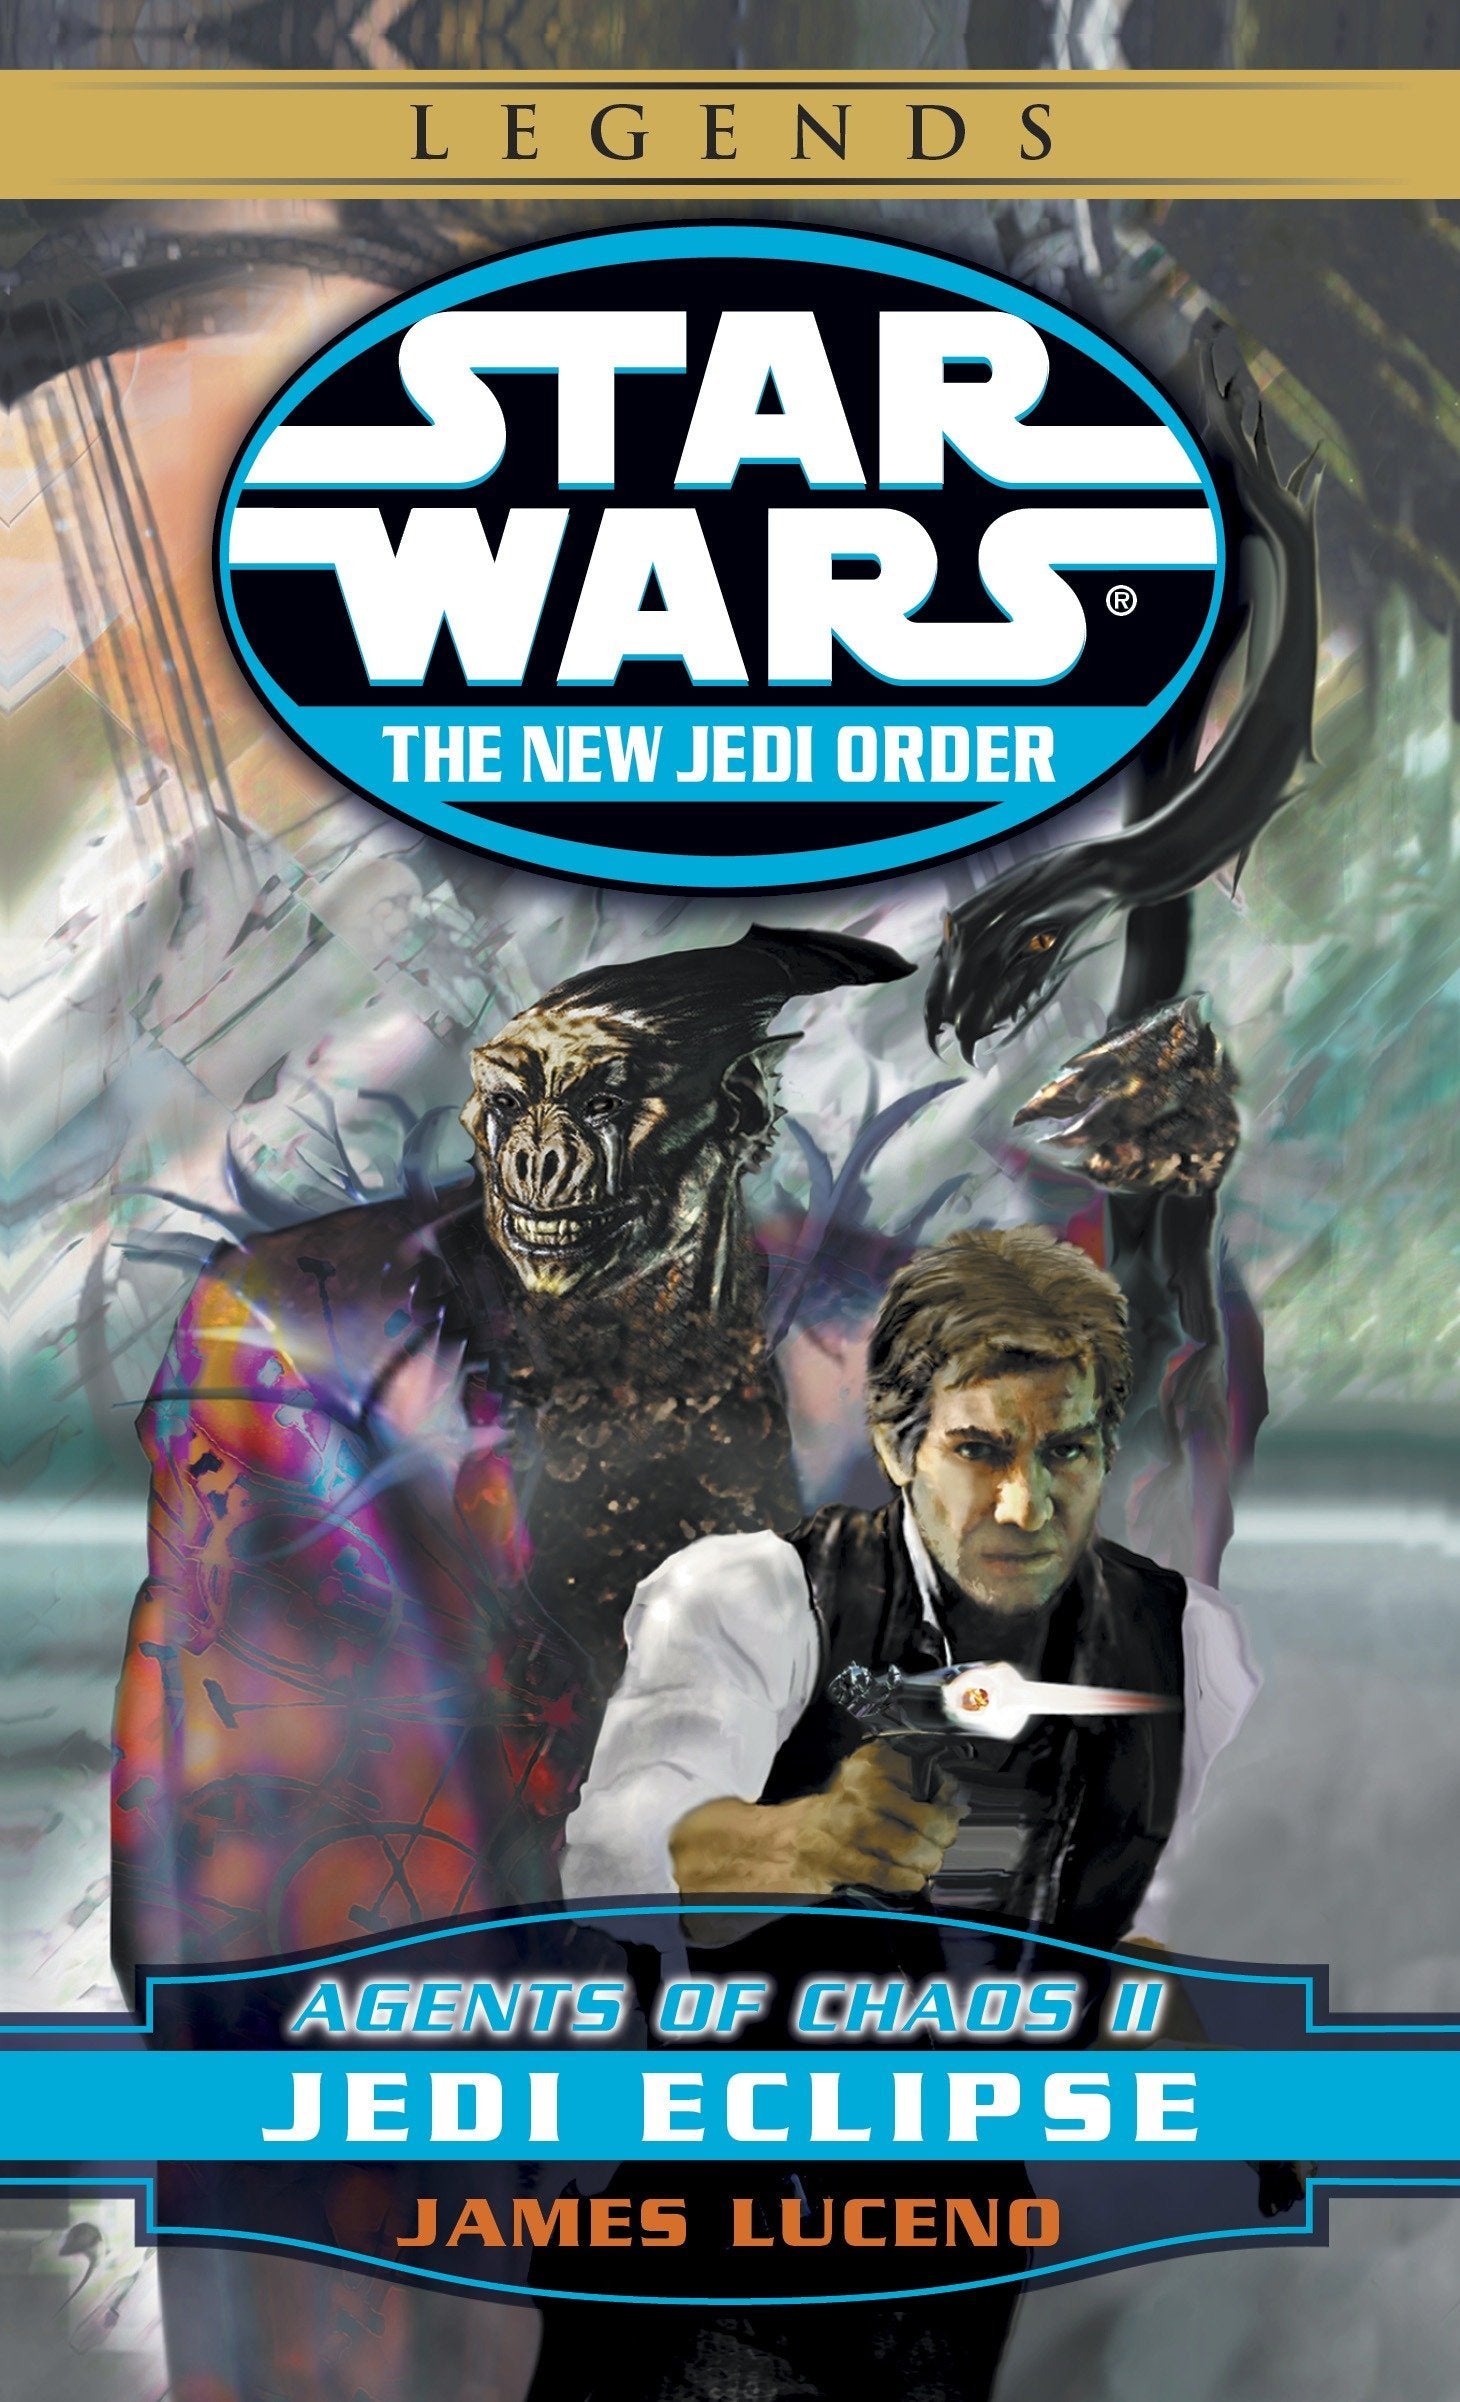 Livre ISBN 0345428595 Star Wars : The new Jedi order : Agents of Chaos, Book II (James Luceno)